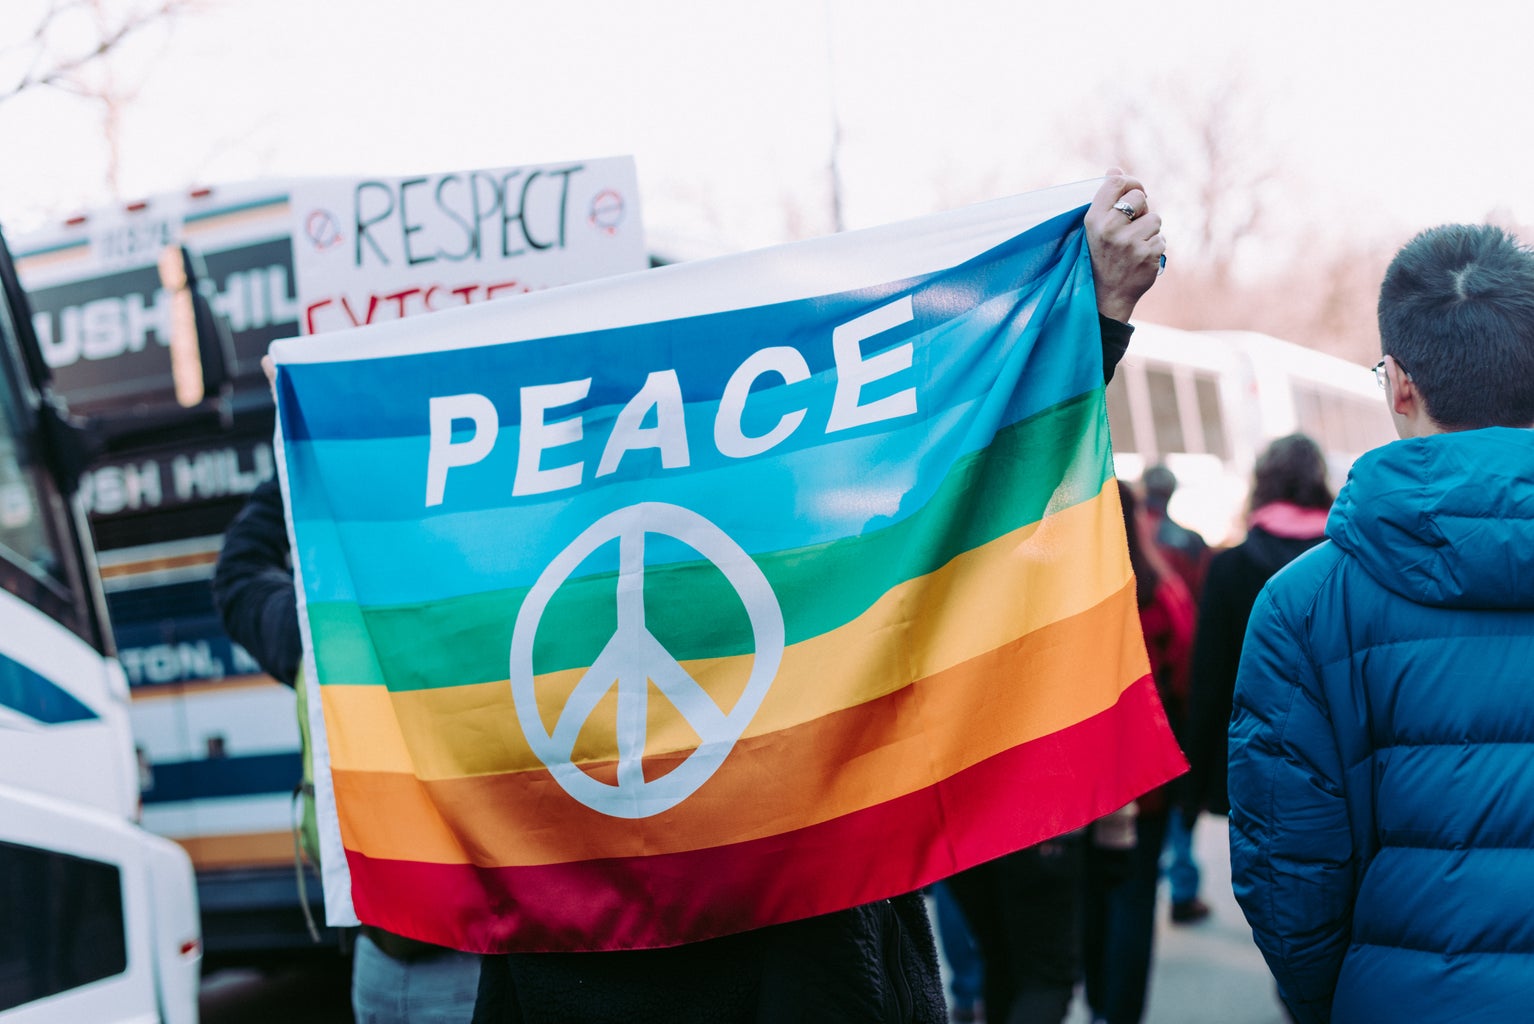 LGBTQ Protest banner- holding up a plea for peace for members of the LGBTQ community